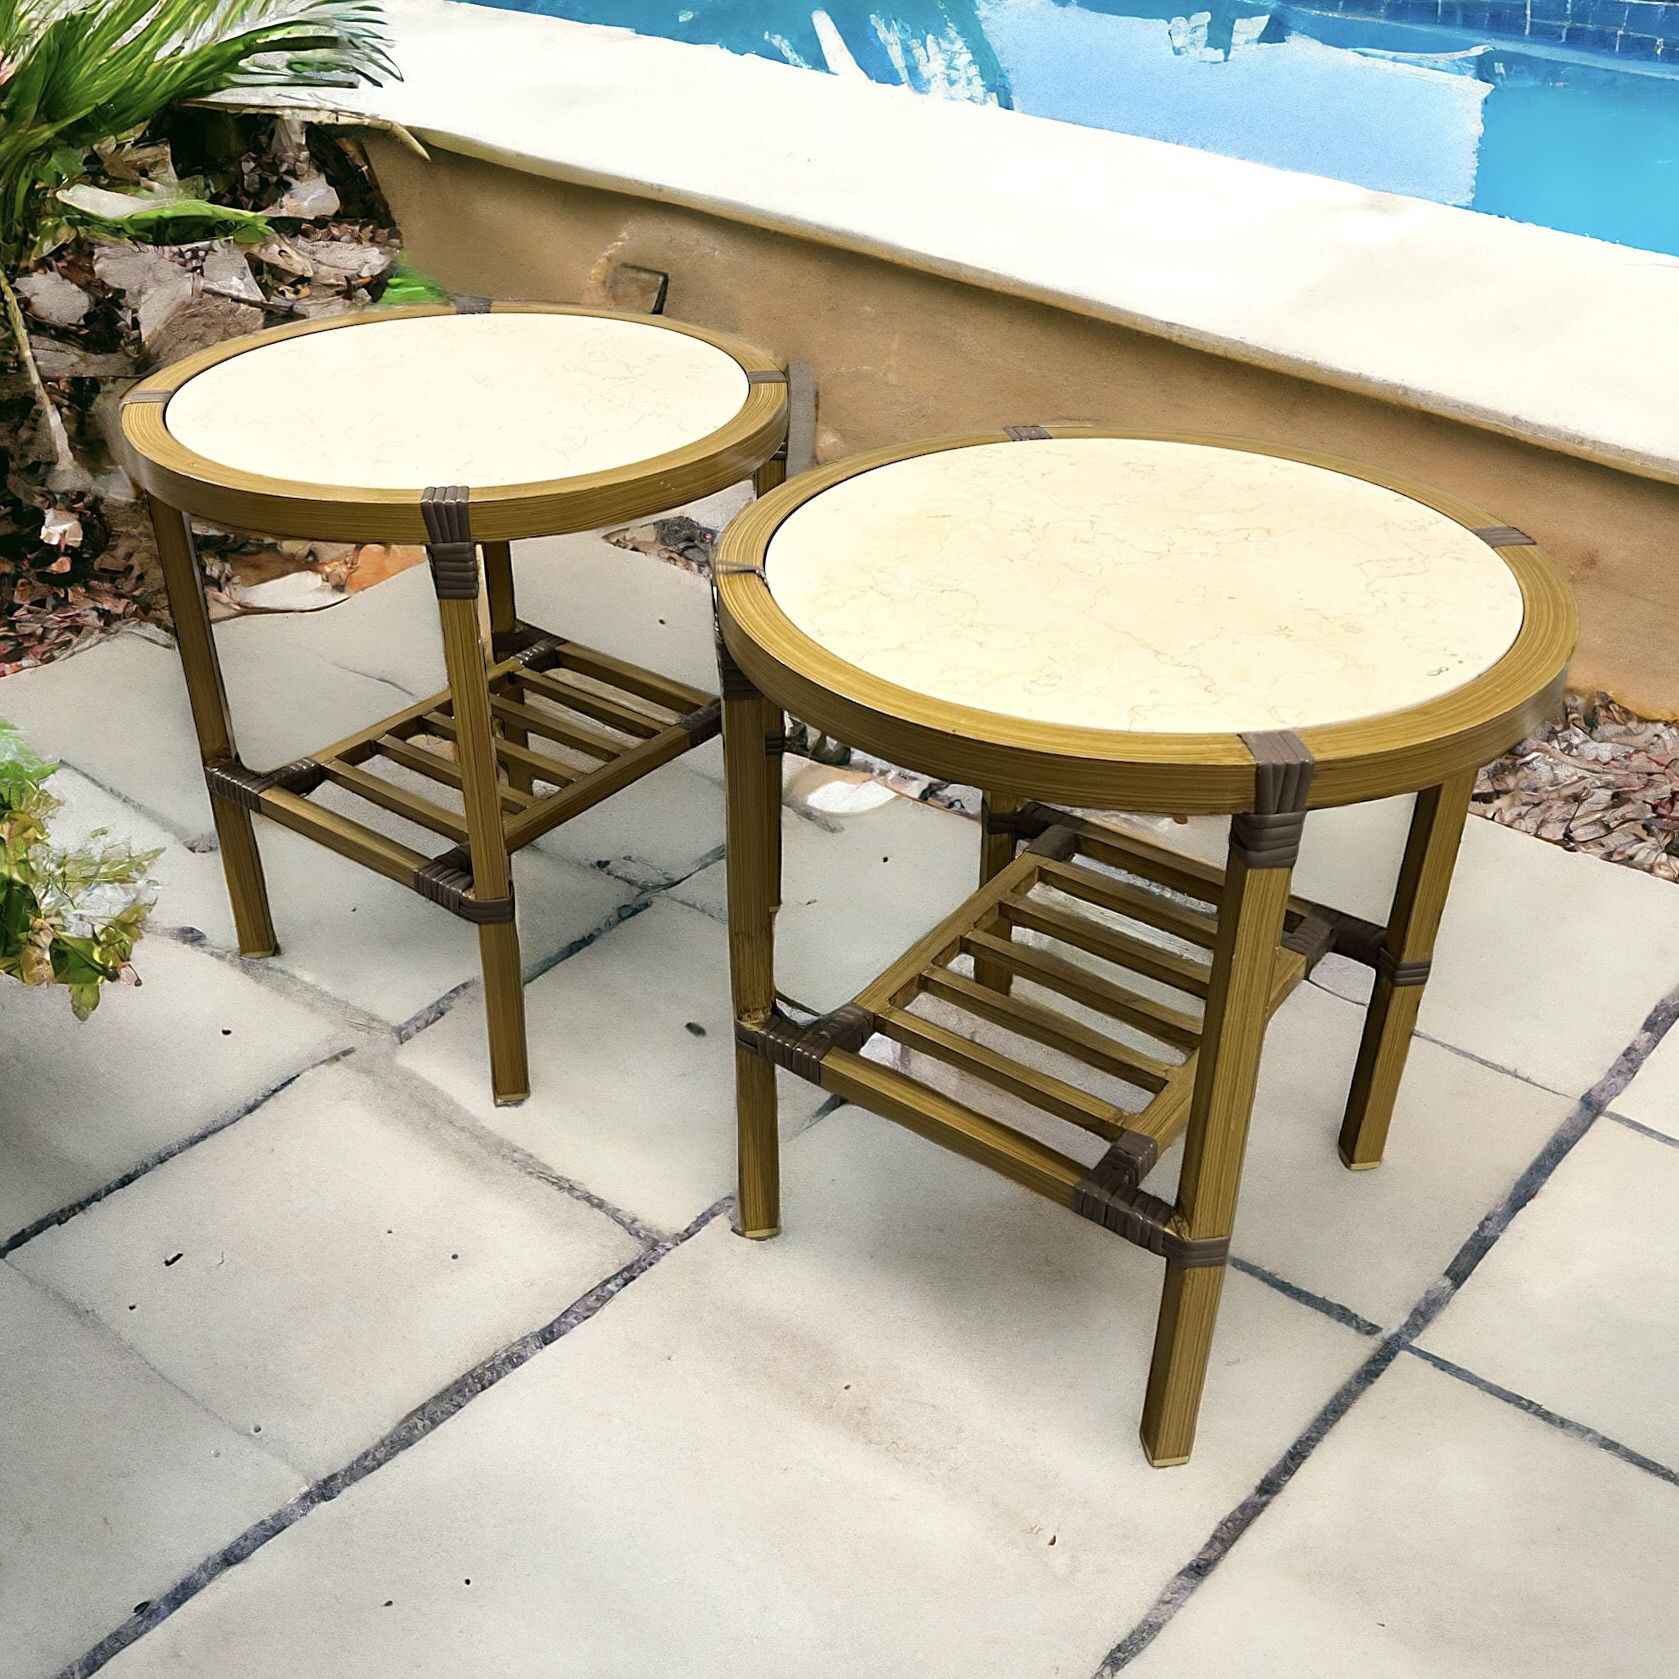 $40 for (2) Tropical Themed Stone Top Patio Accent/Side Tables